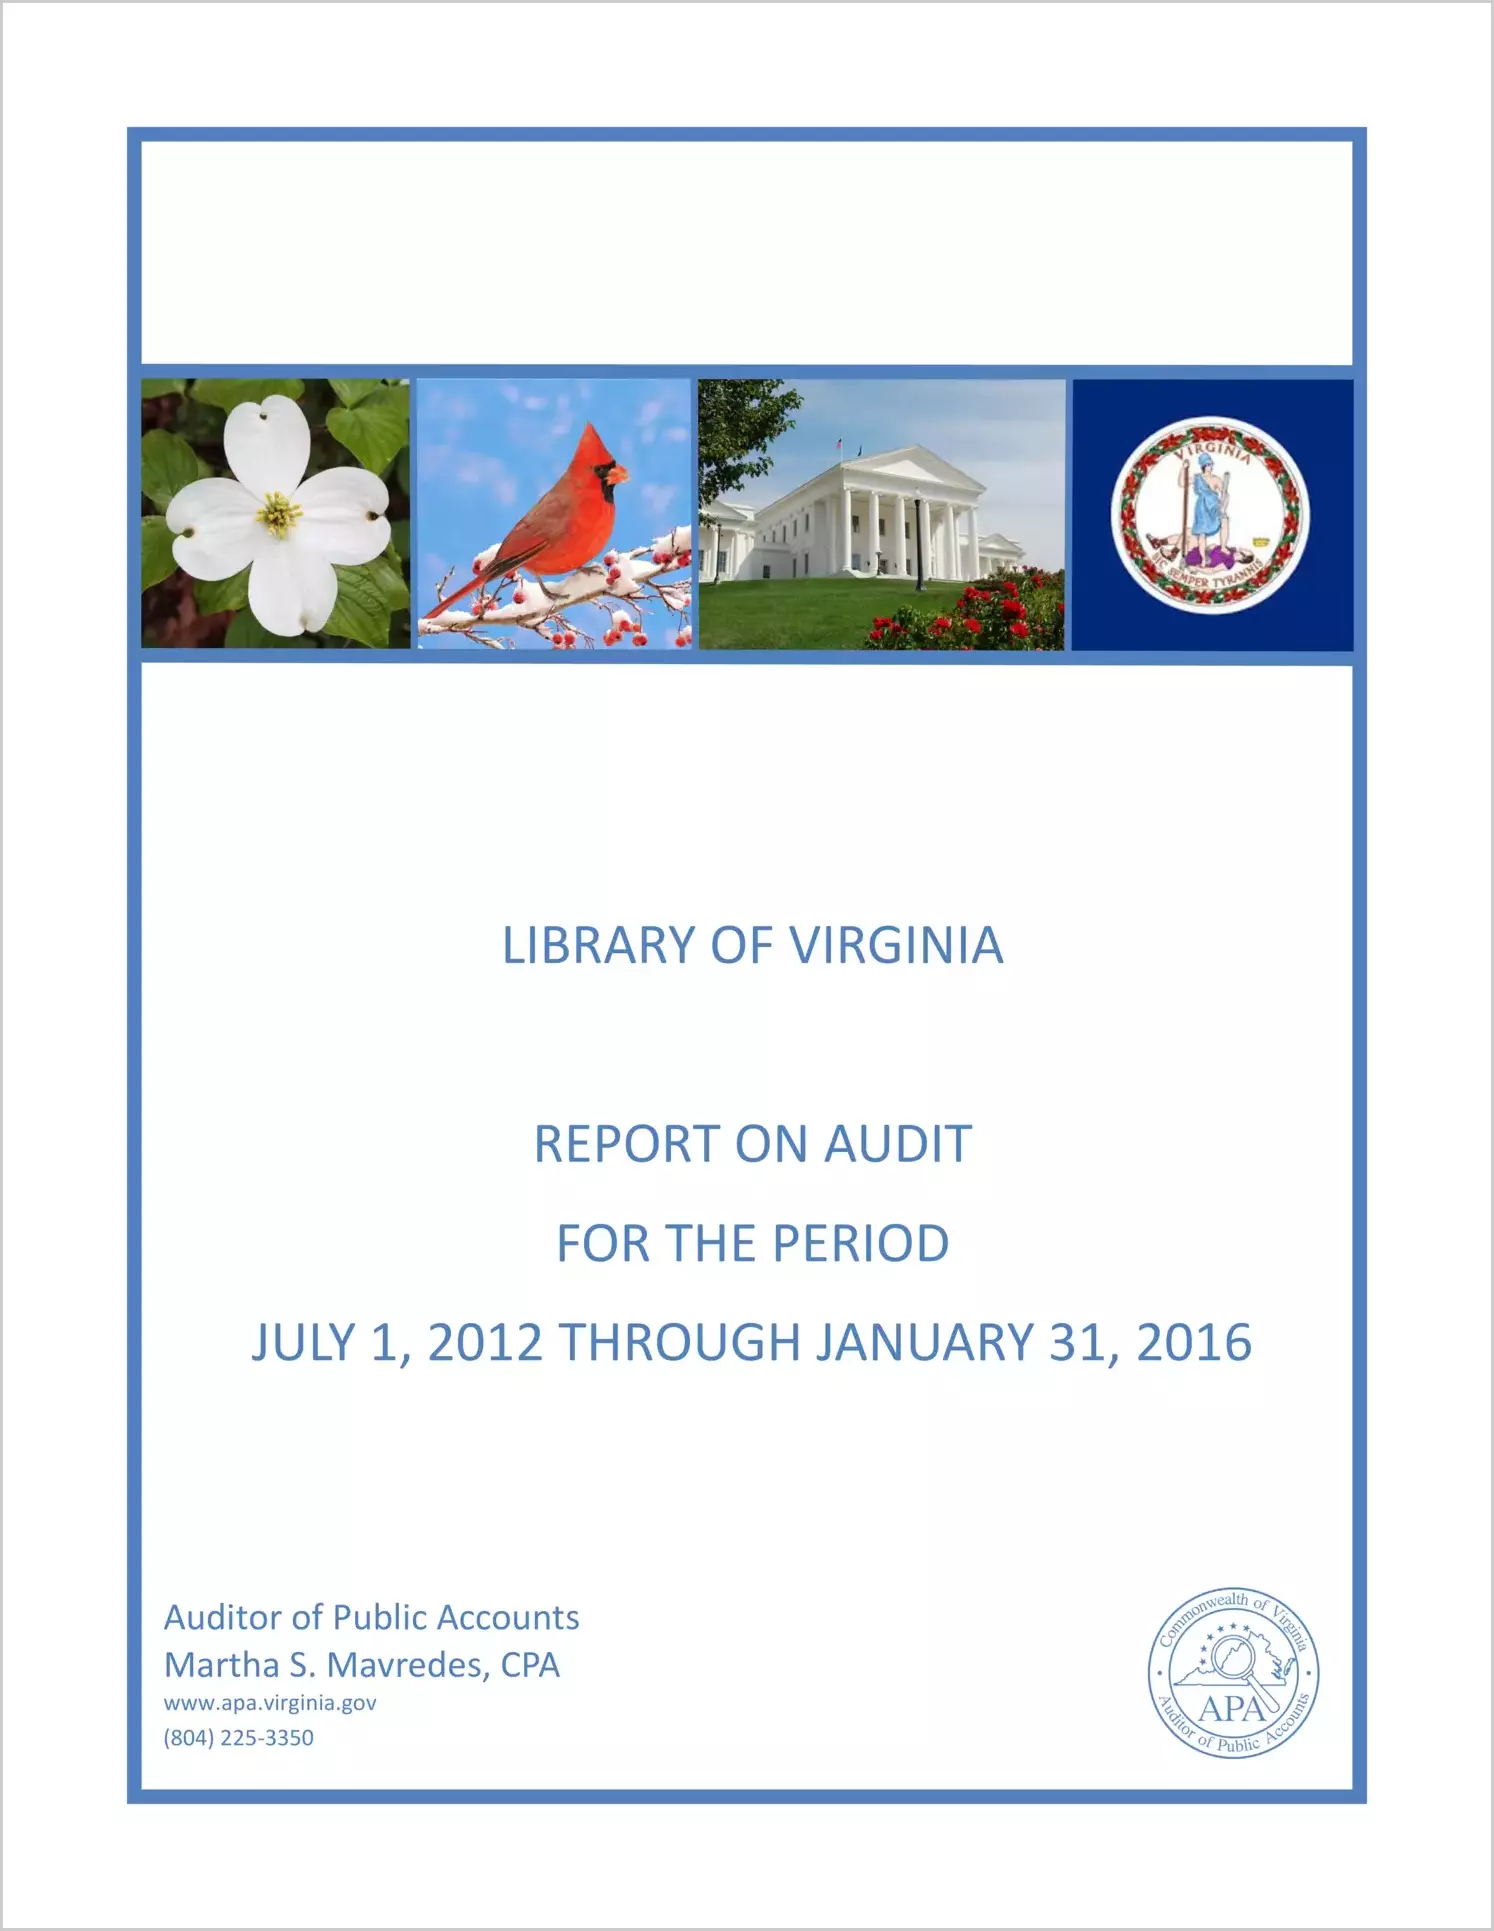 The Library of Virginia Report on Audit for the Period July 1, 2012 through January 31, 2016